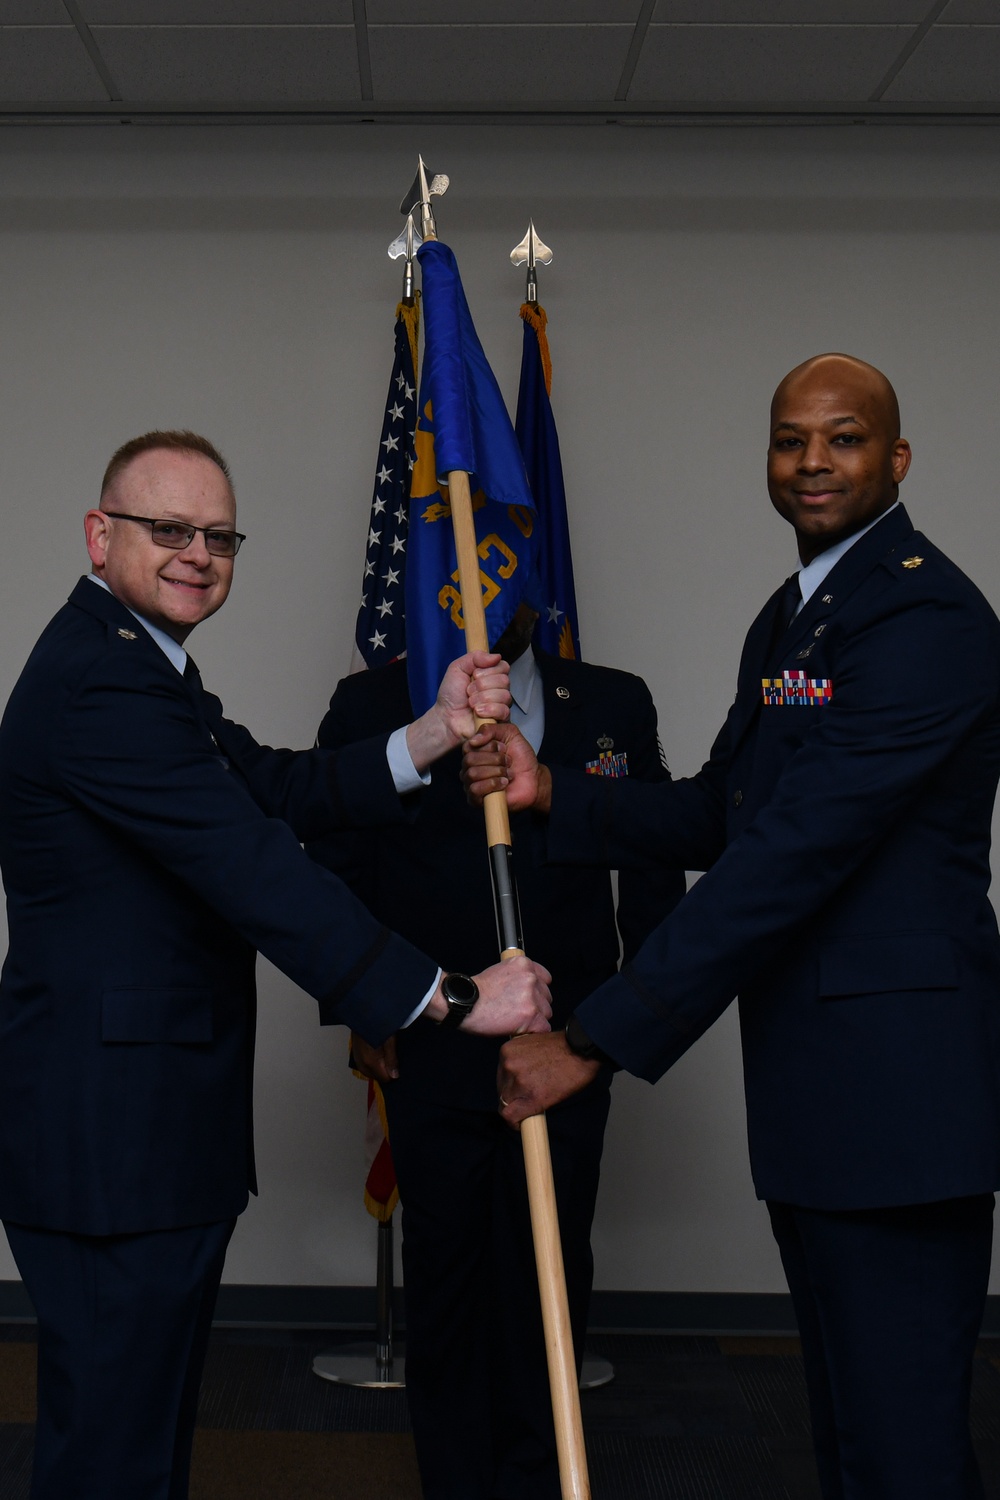 Harris assumes command of 910th Civil Engineer Squadron